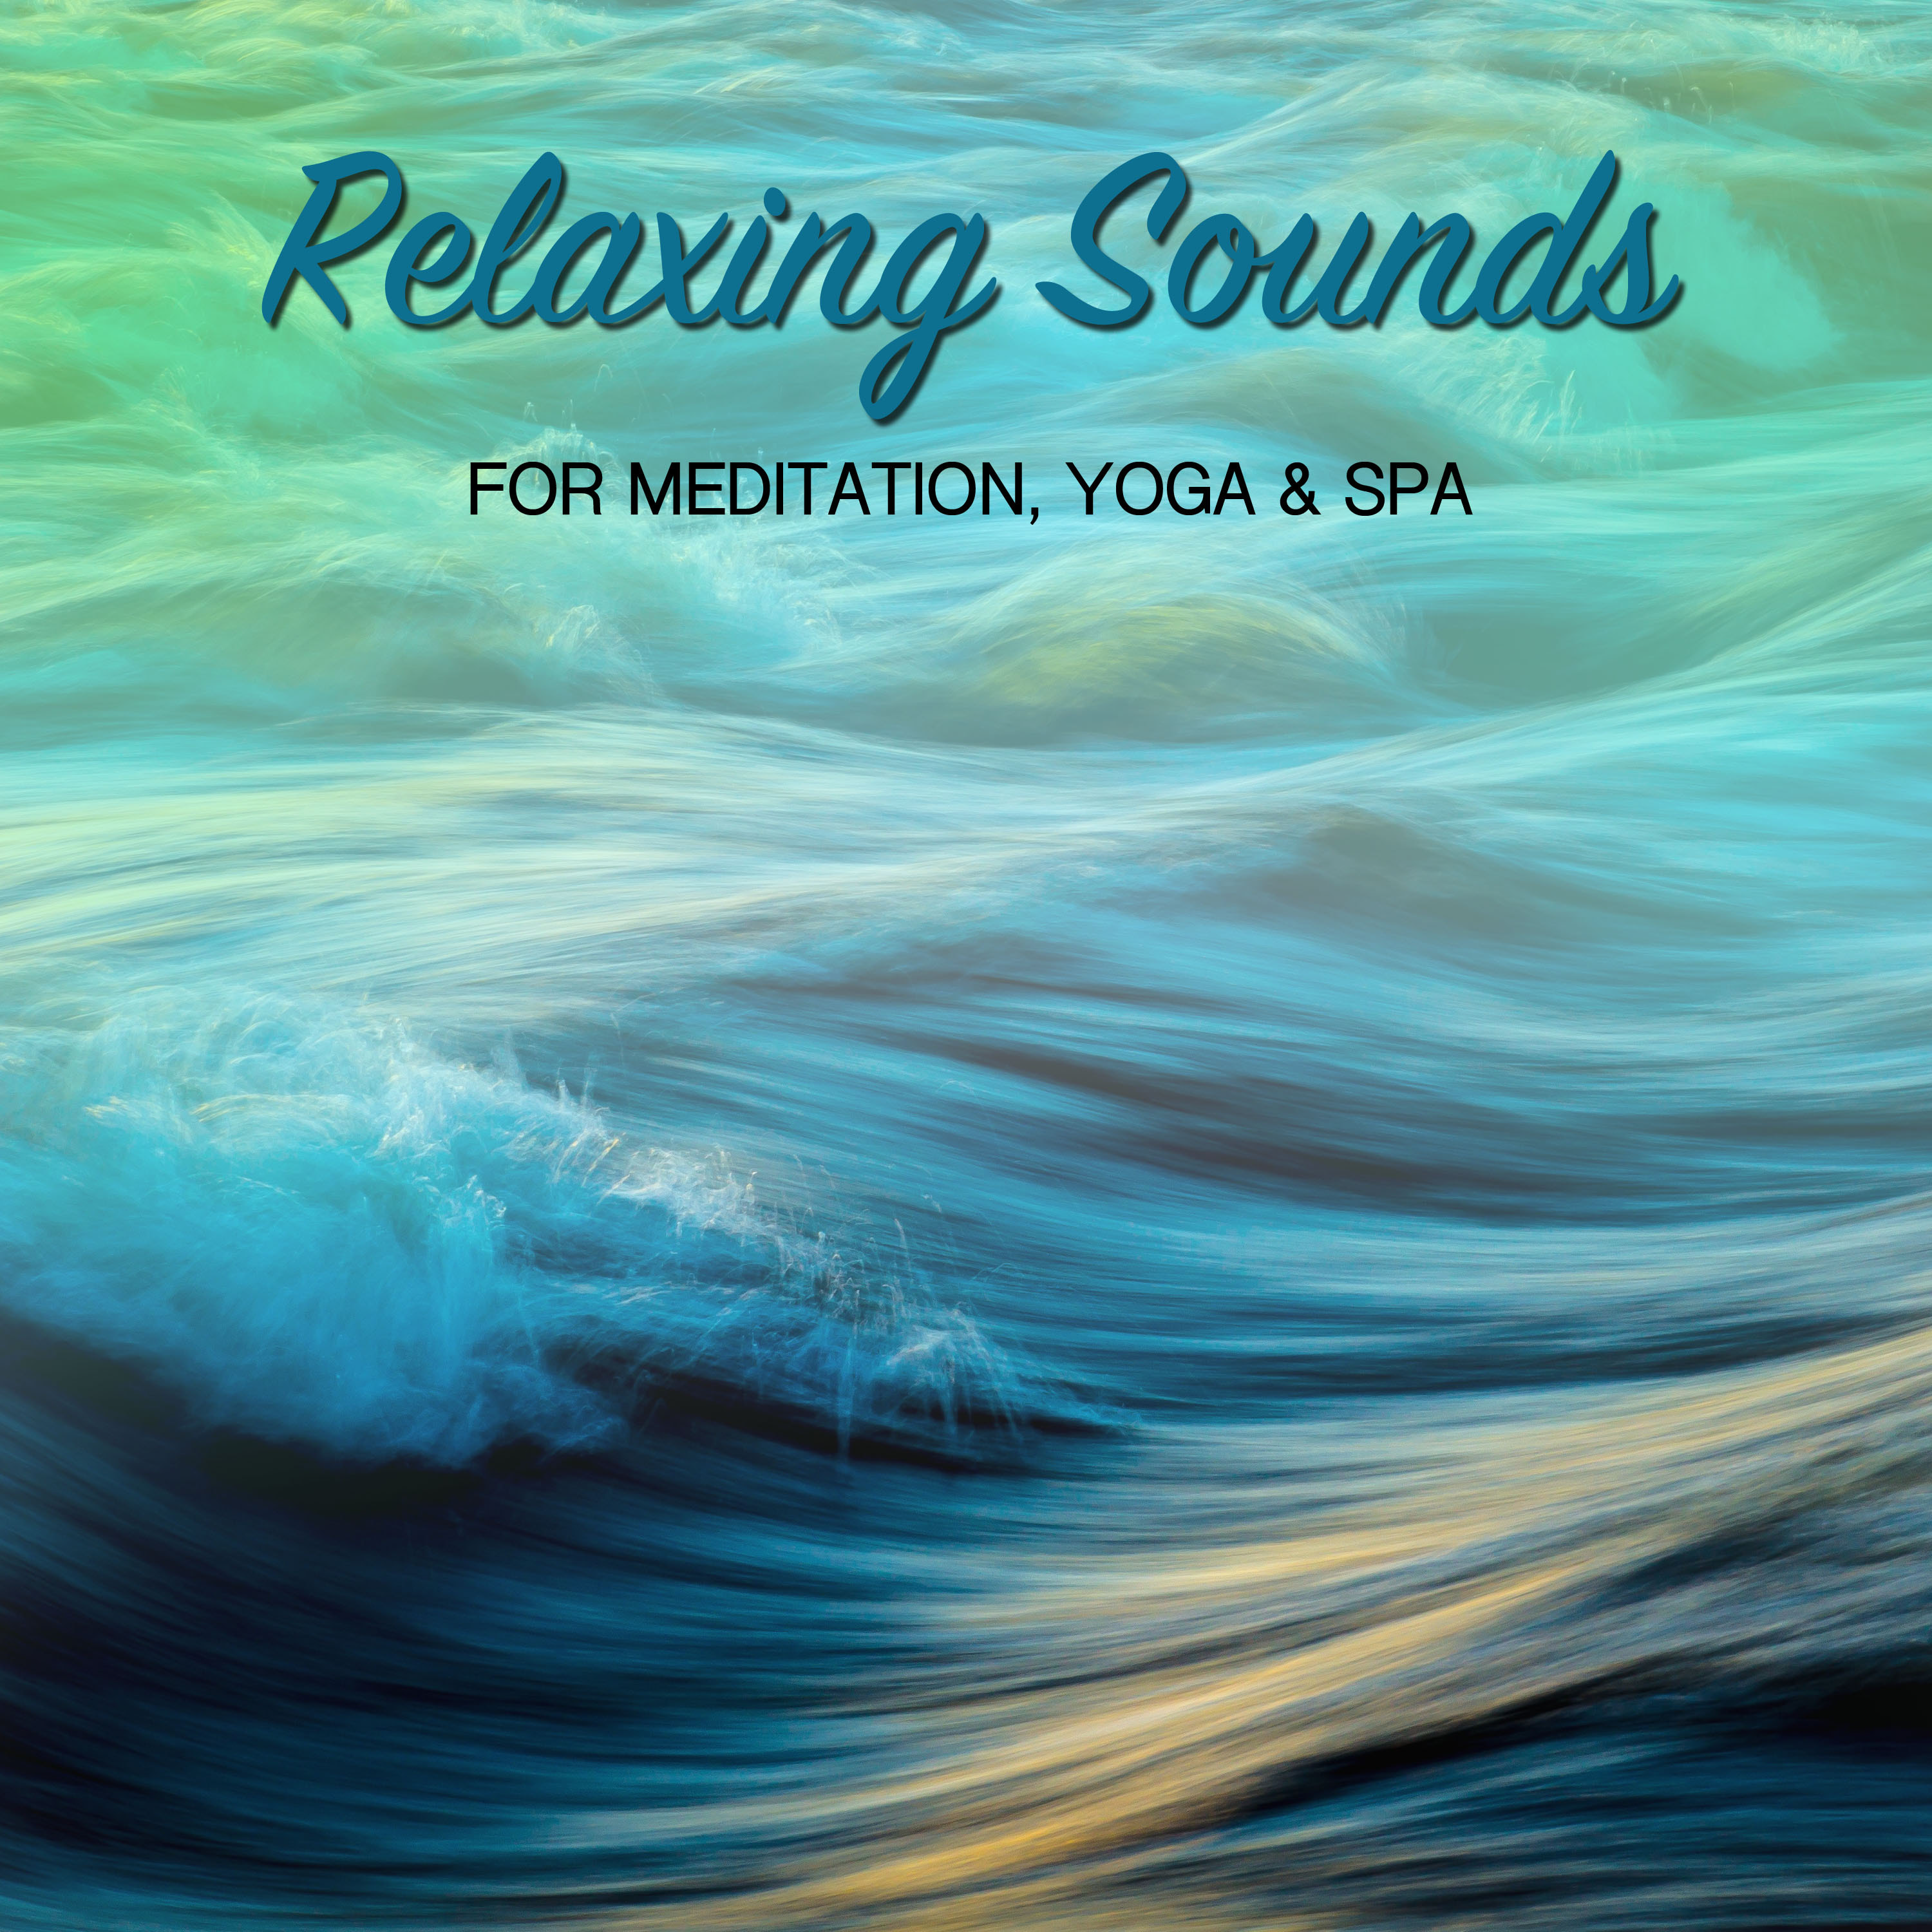 #14 Relaxing Sounds for Meditation, Yoga & Spa